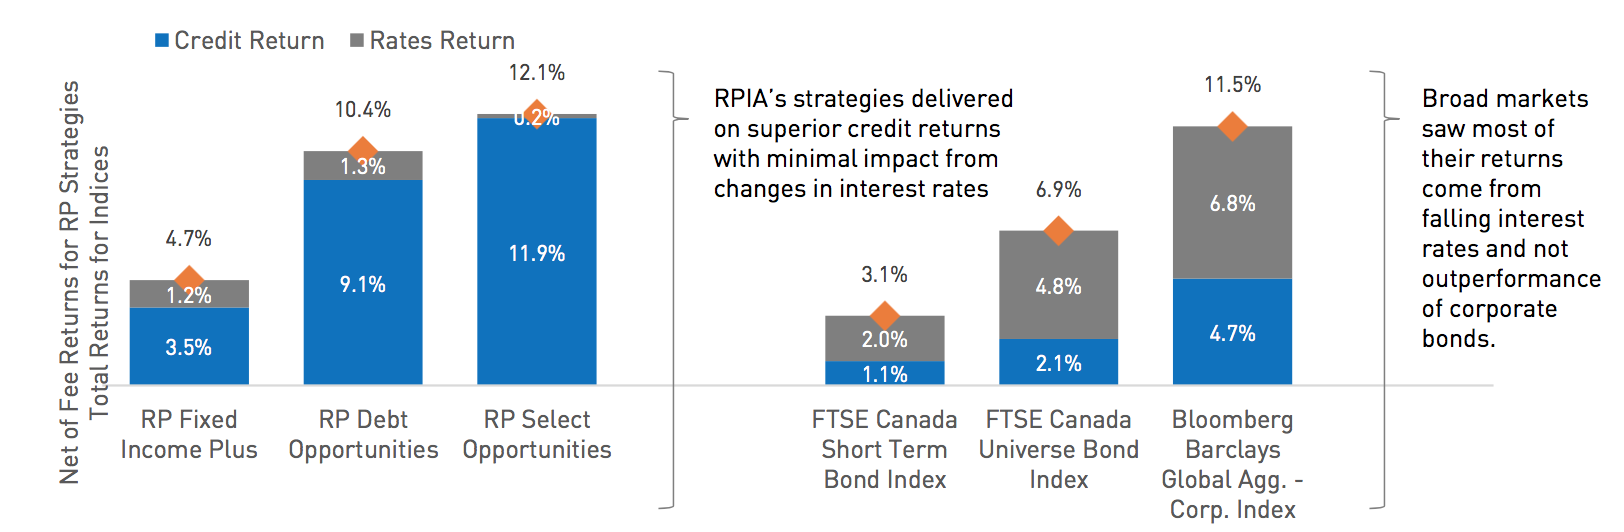 PIA Strategies Return Profile Focused on Our Areas of Expertise – Corporate Bond Investing